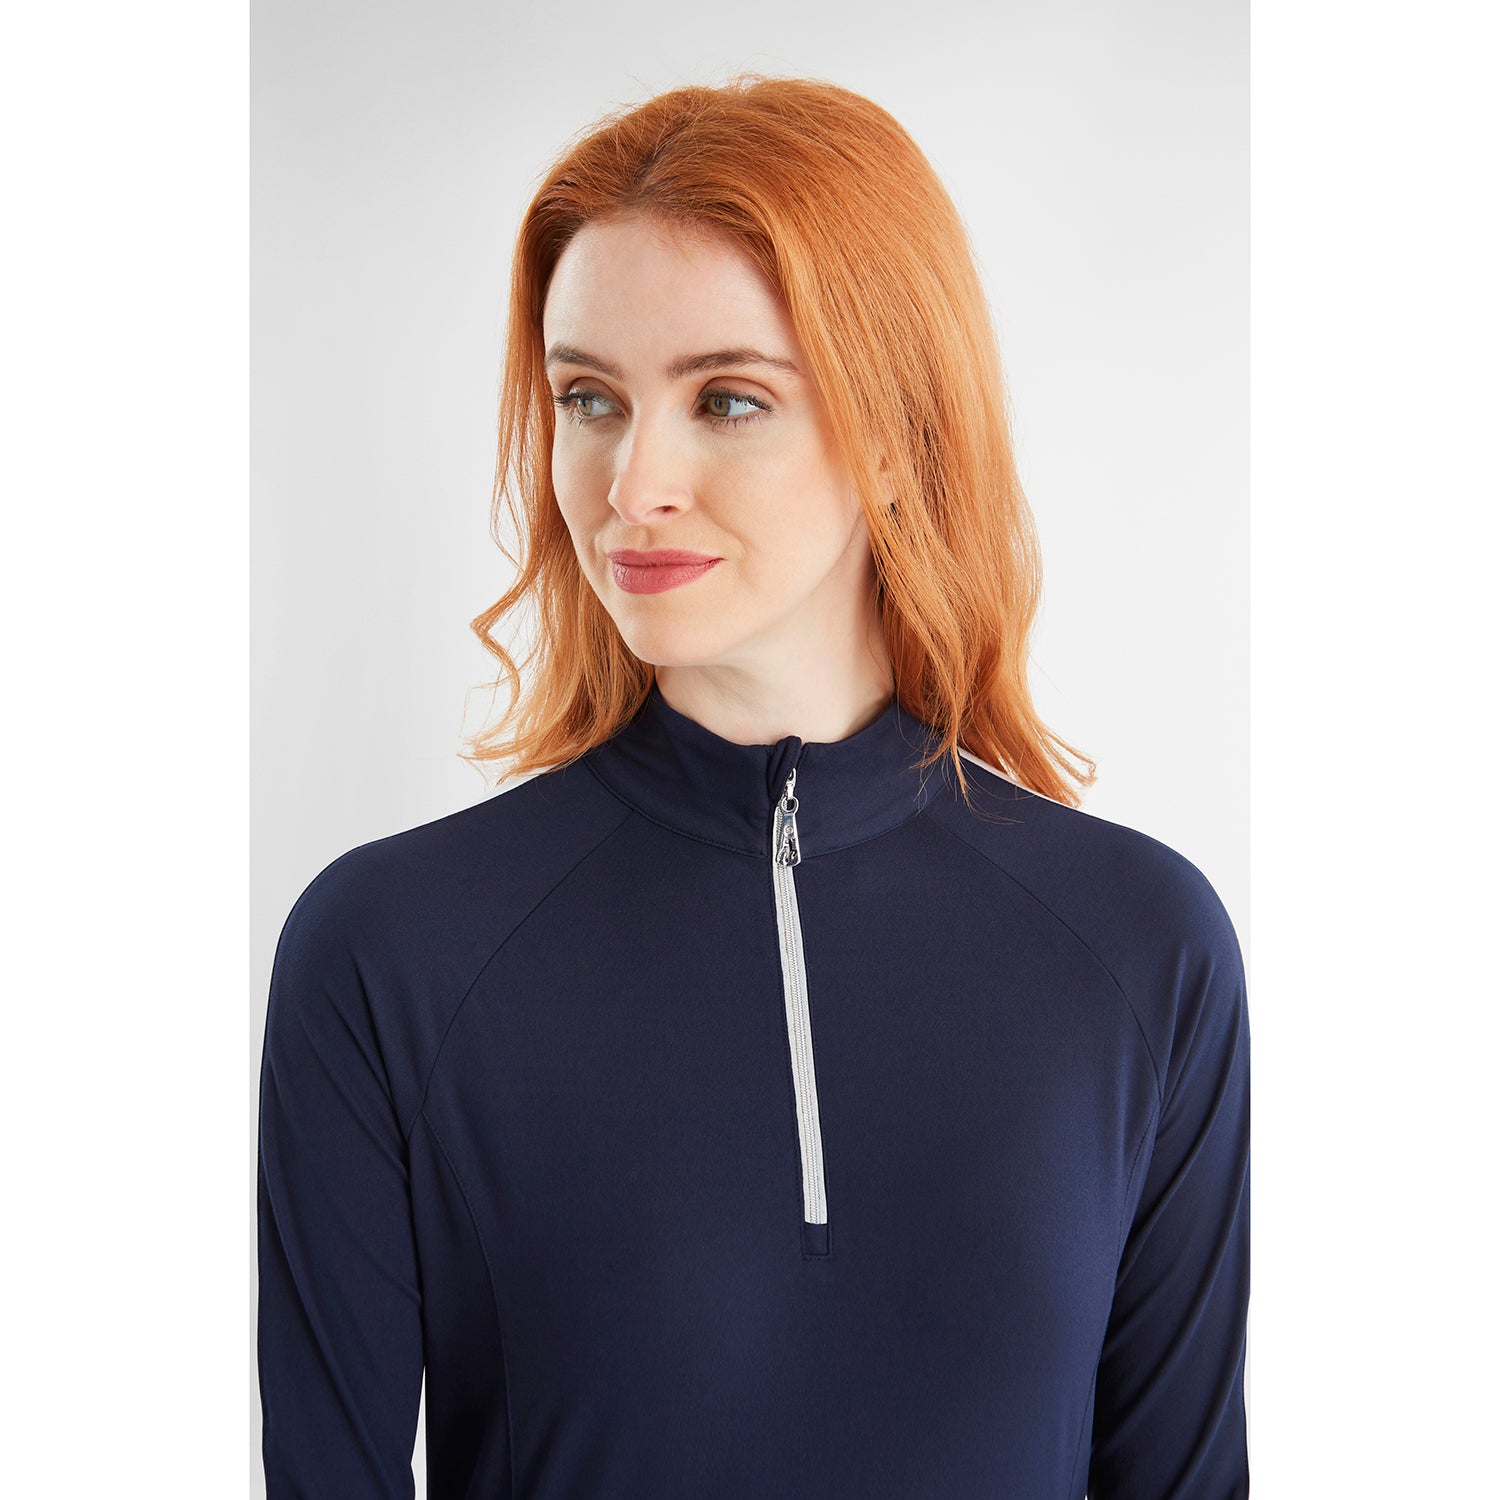 Green Lamb Ladies 1/4 Zip Neck Top with Contrast Stripes in Navy/White